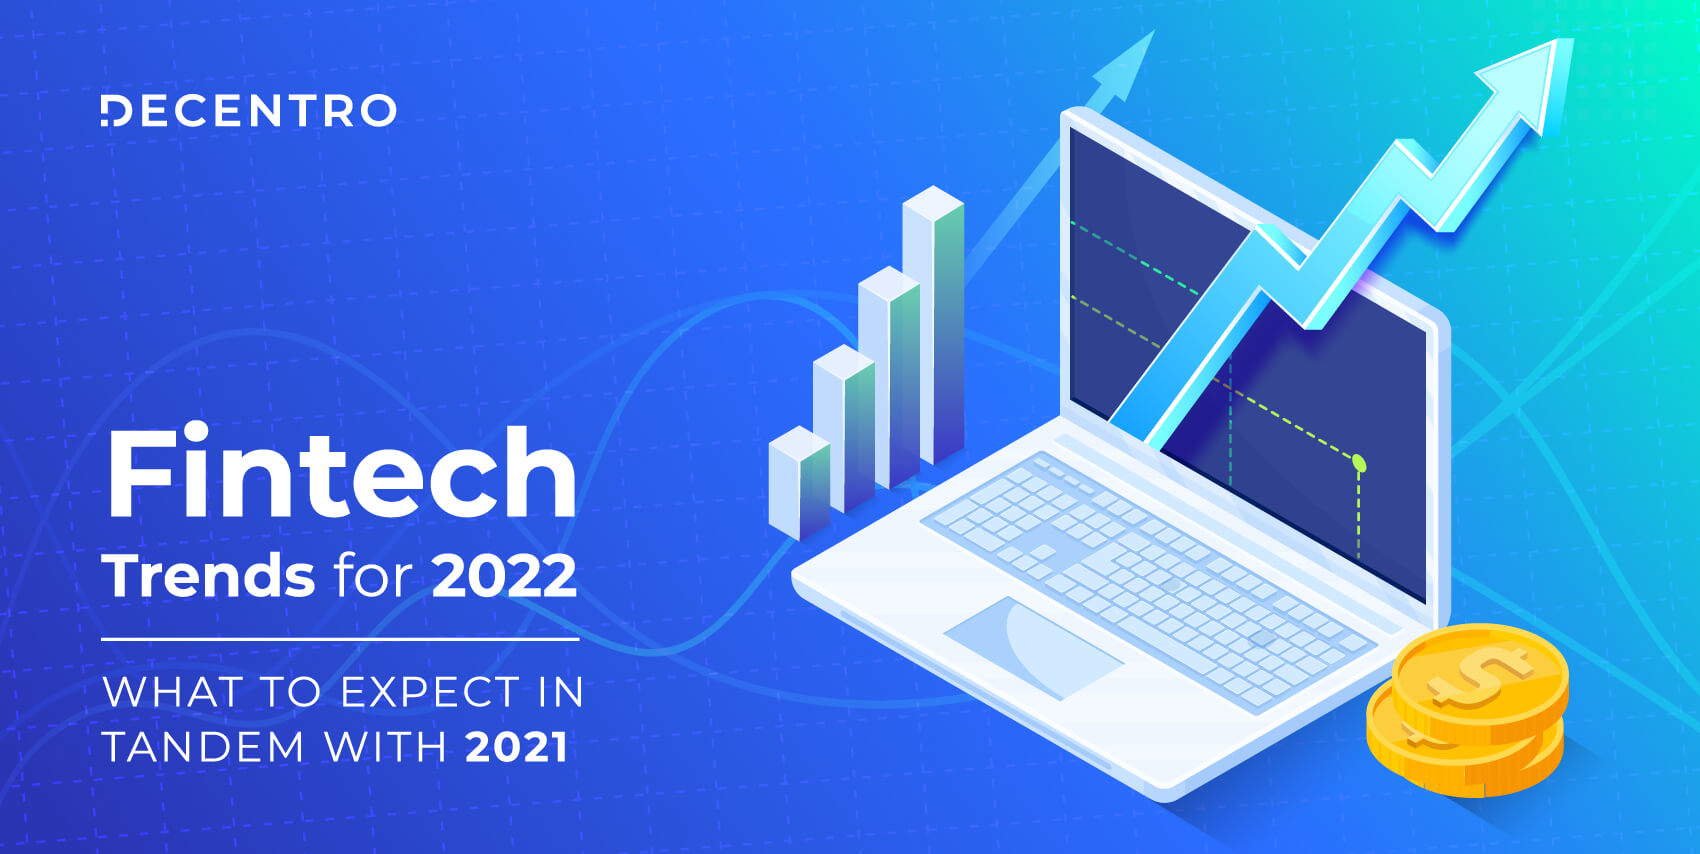 The upcoming trends in the fintech domain for 2022.